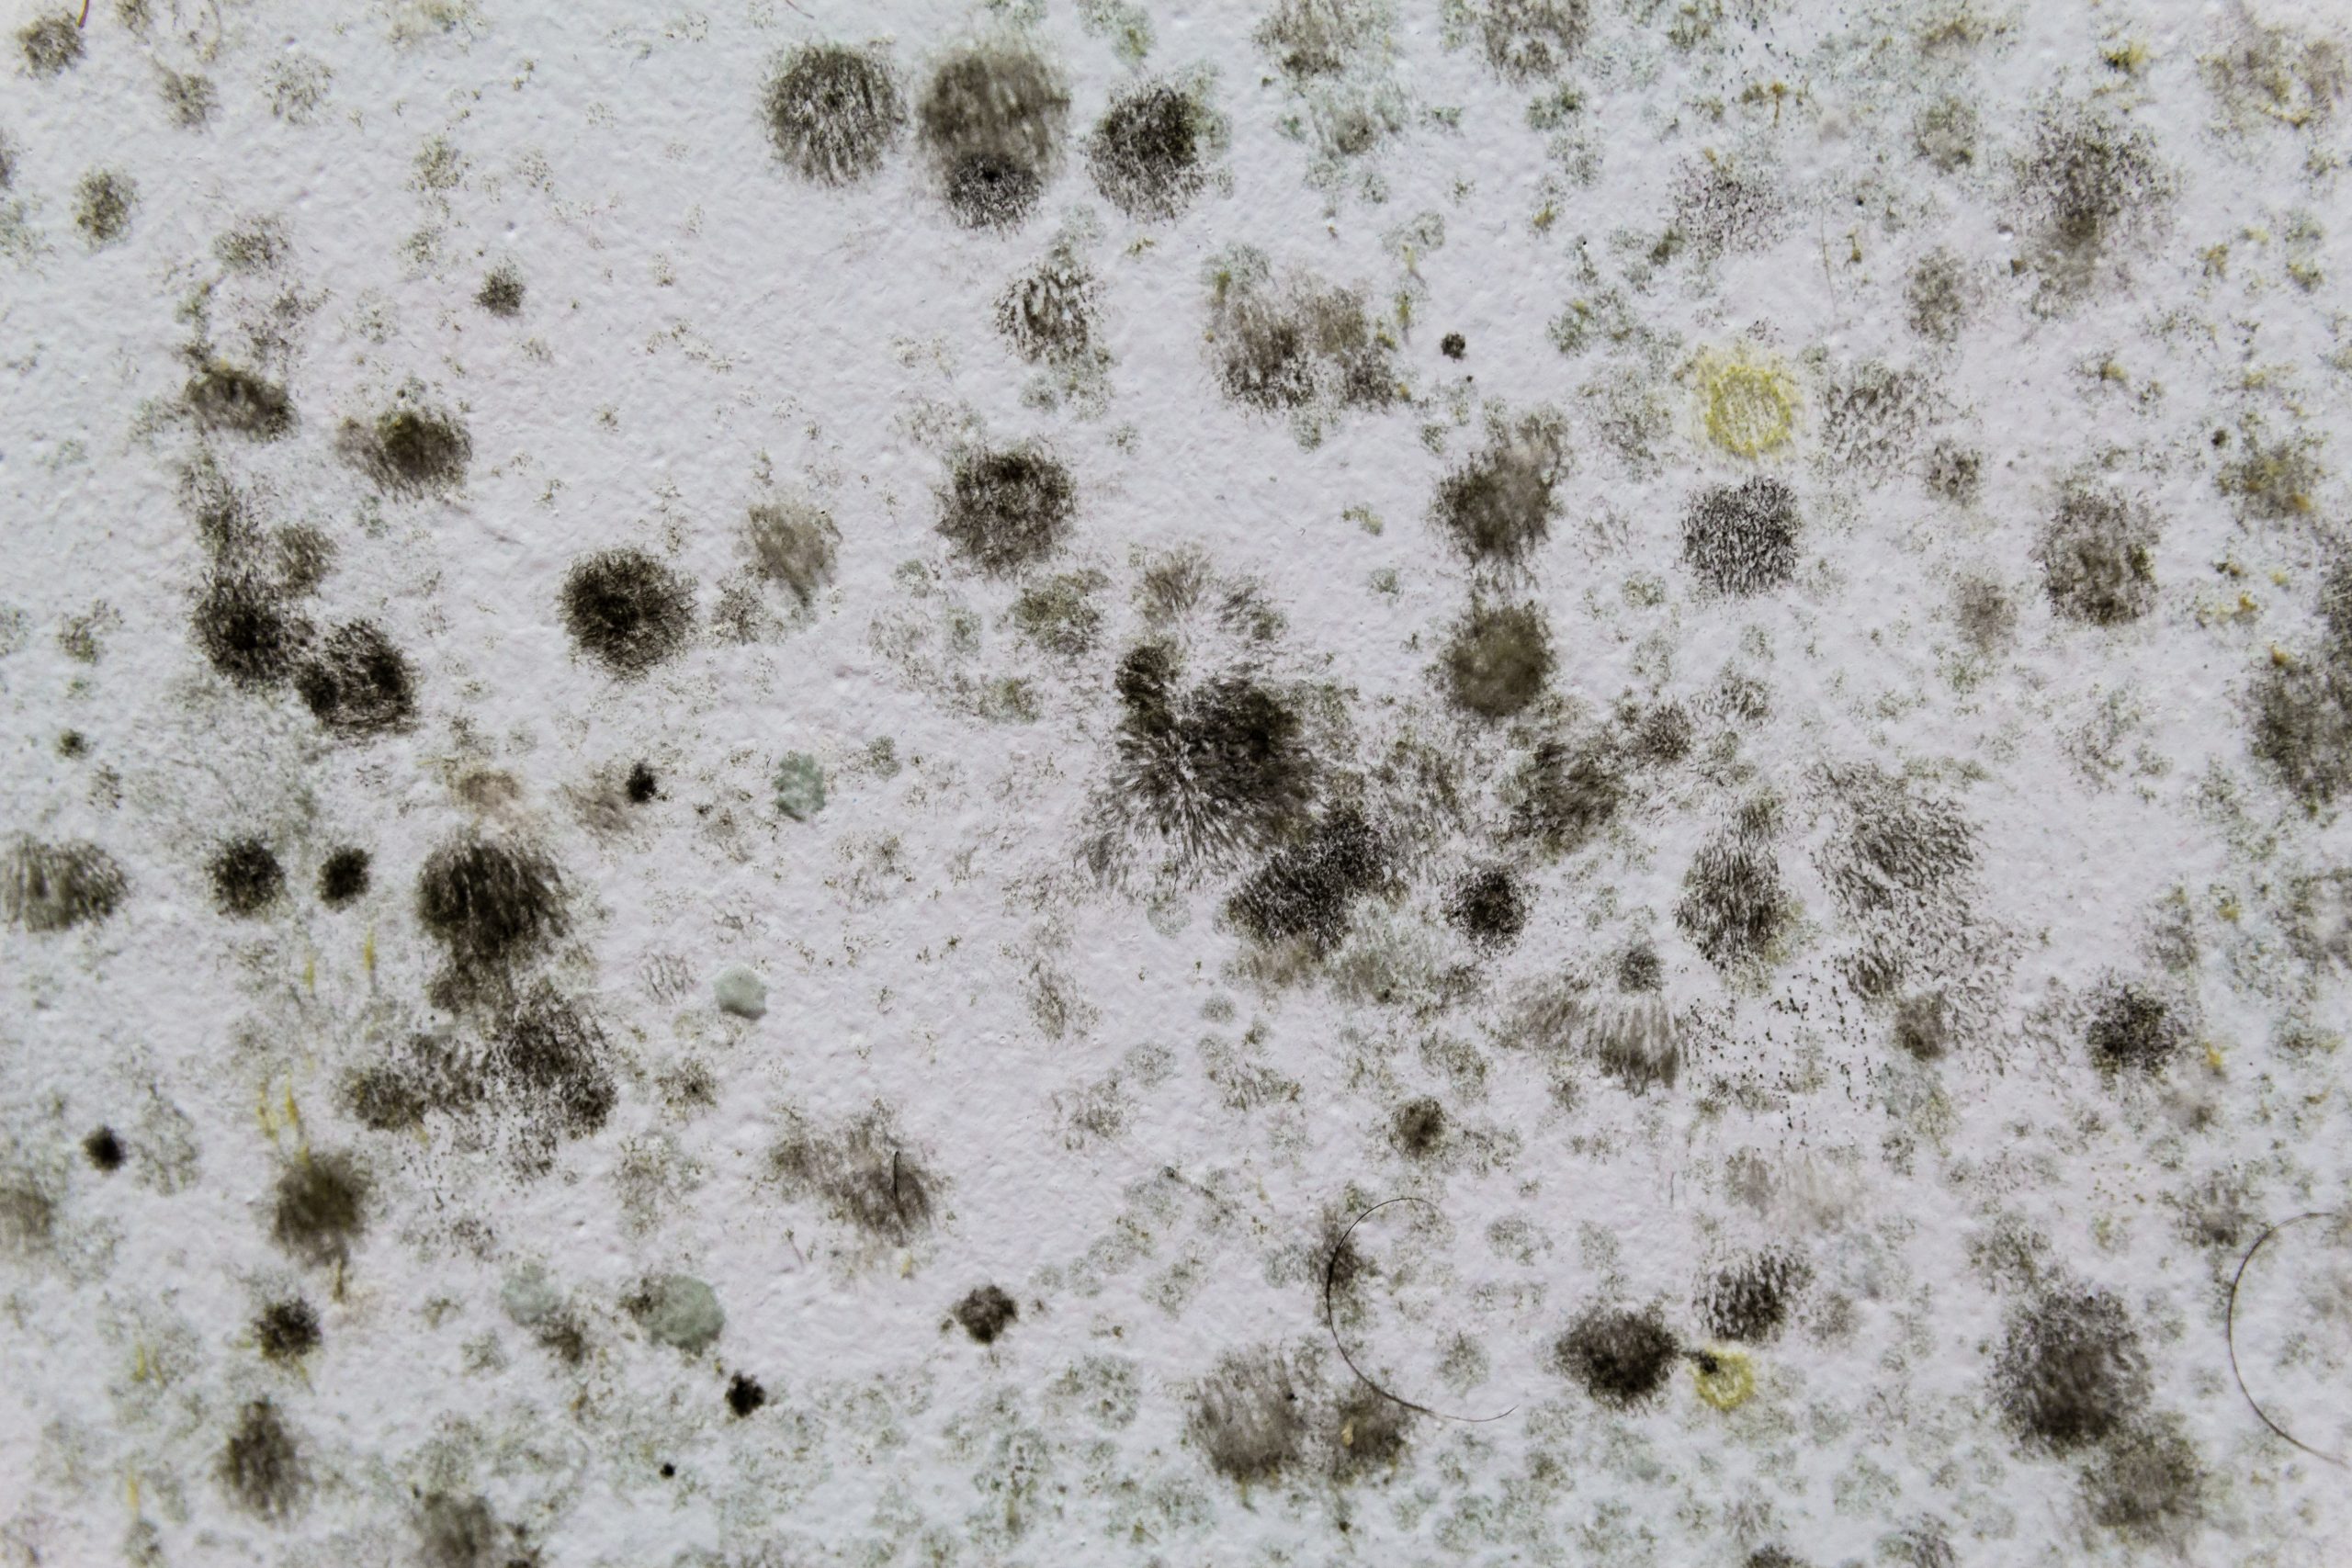 How To Tell If You Have Black Mold Growing In Your Home ...